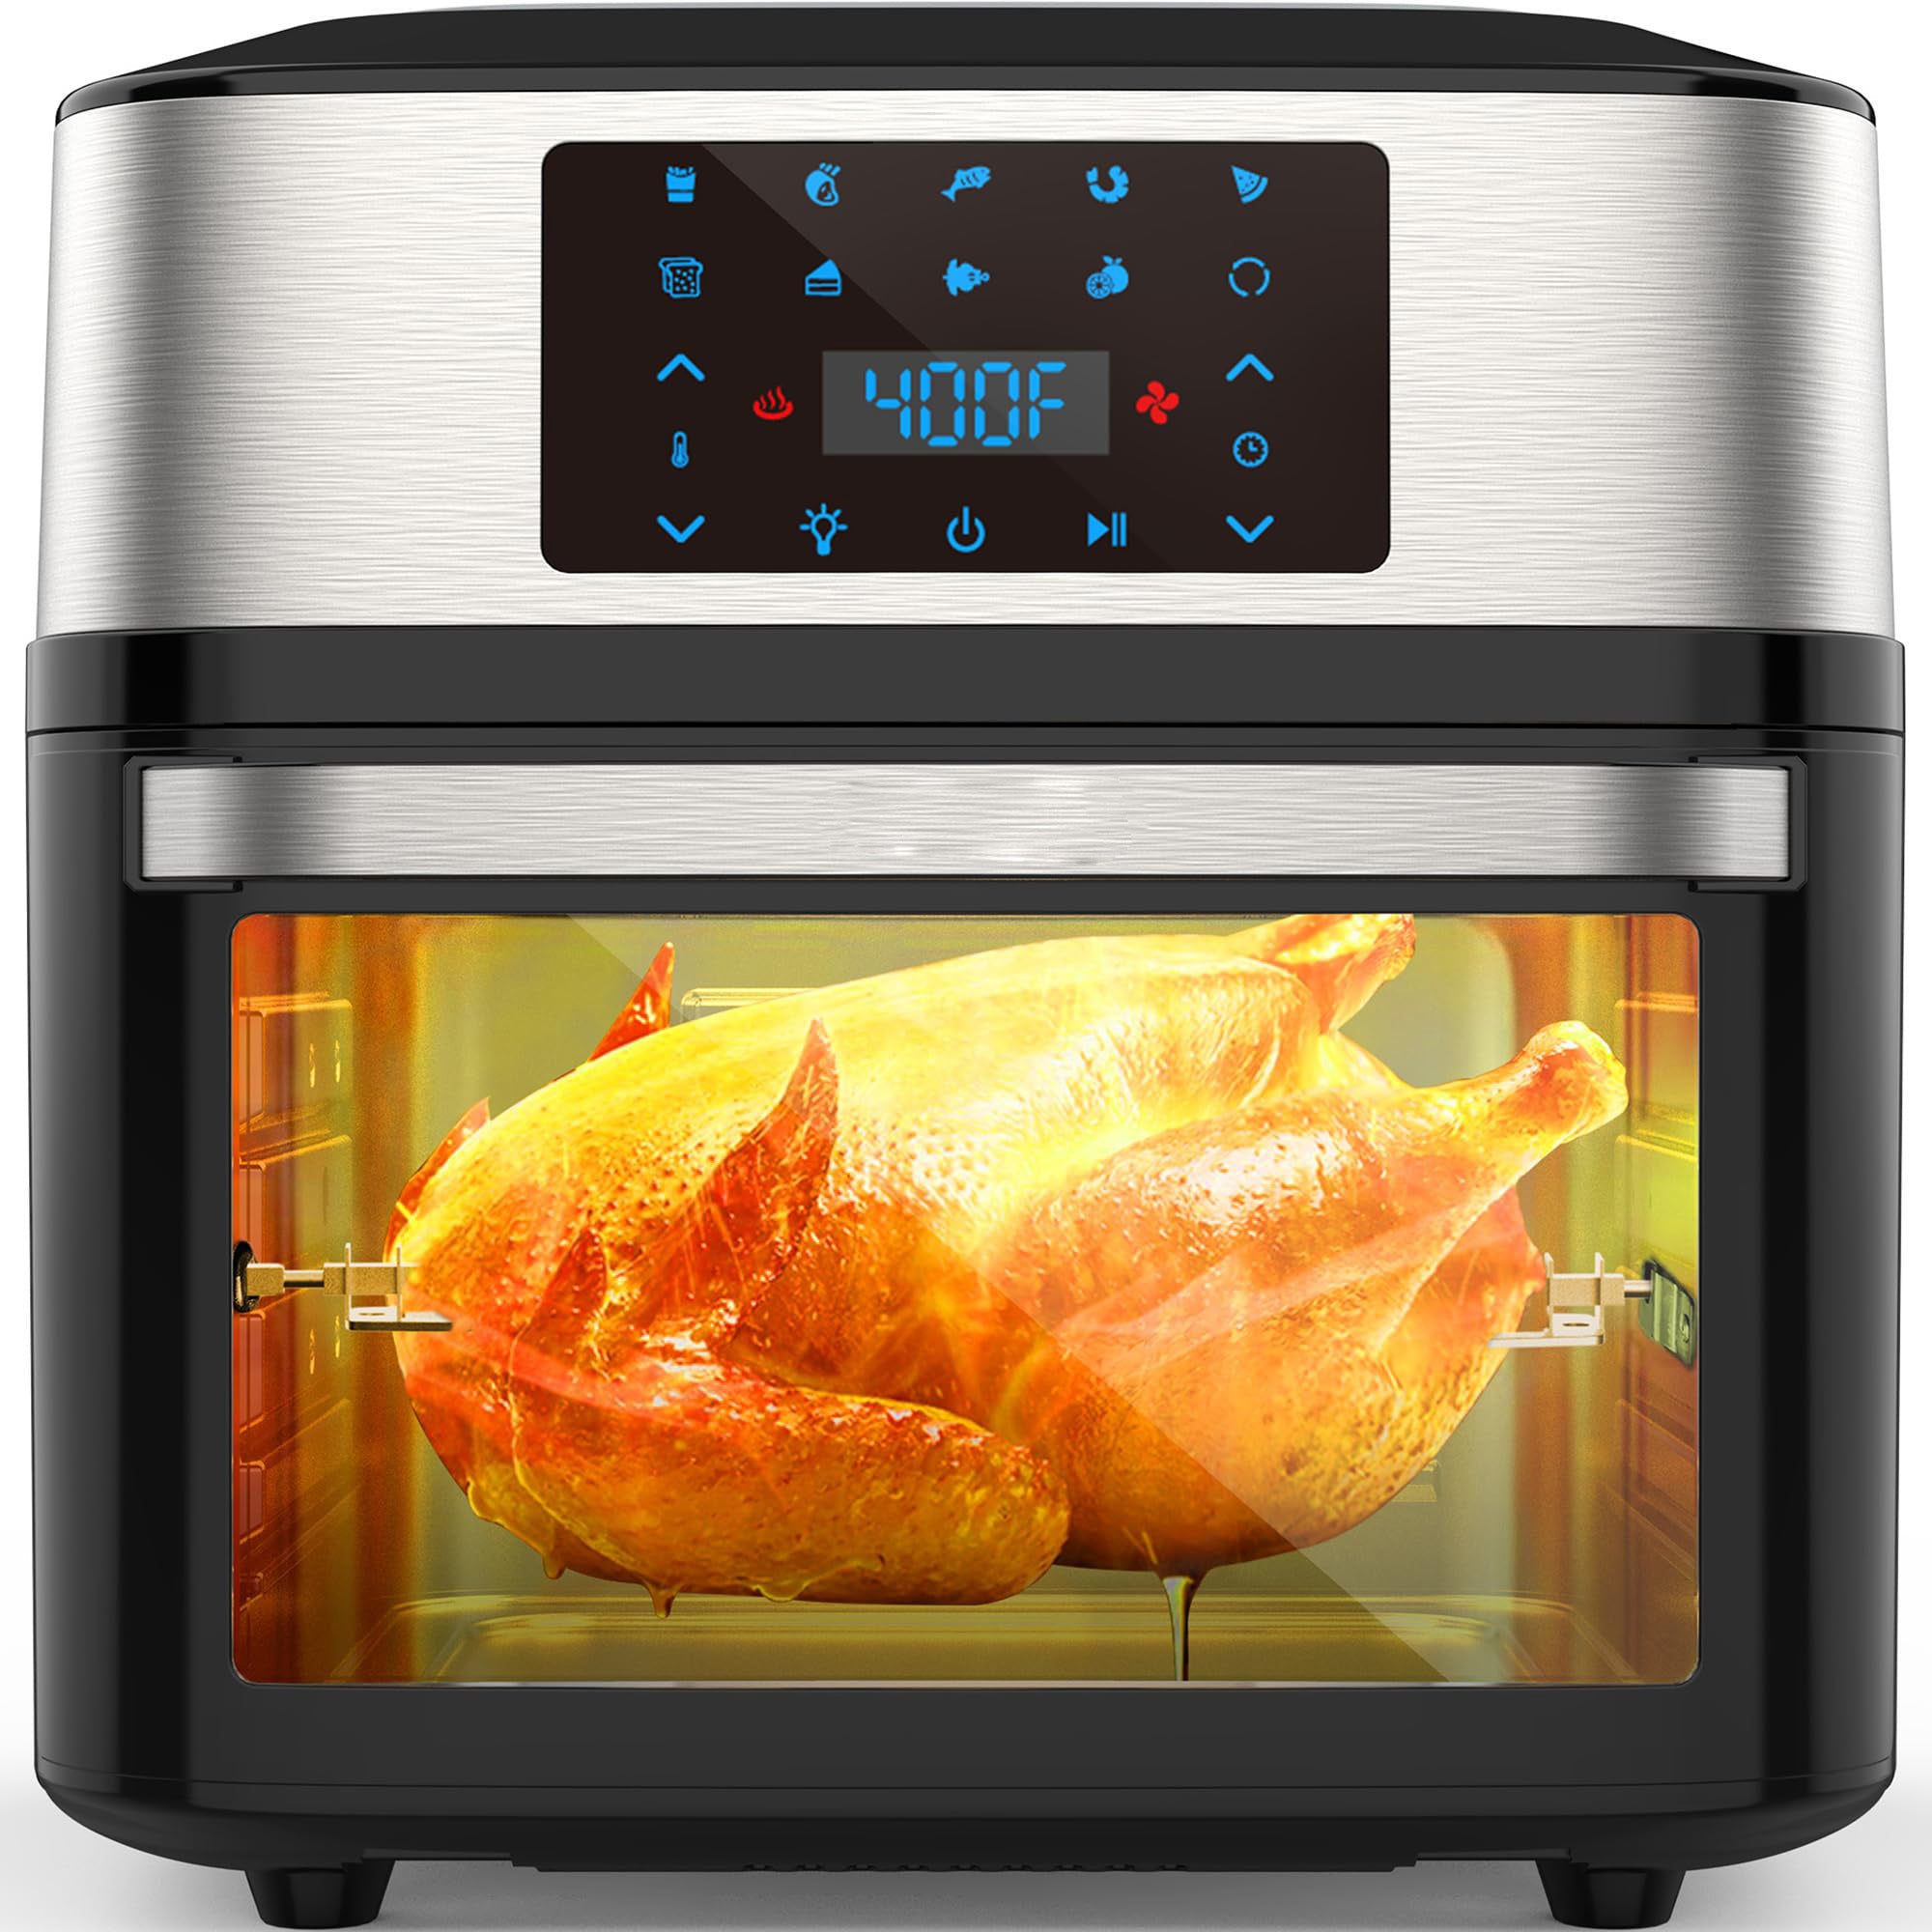 10-in-1 large Air fryer Oven with Visible Cooking Window with Recipes